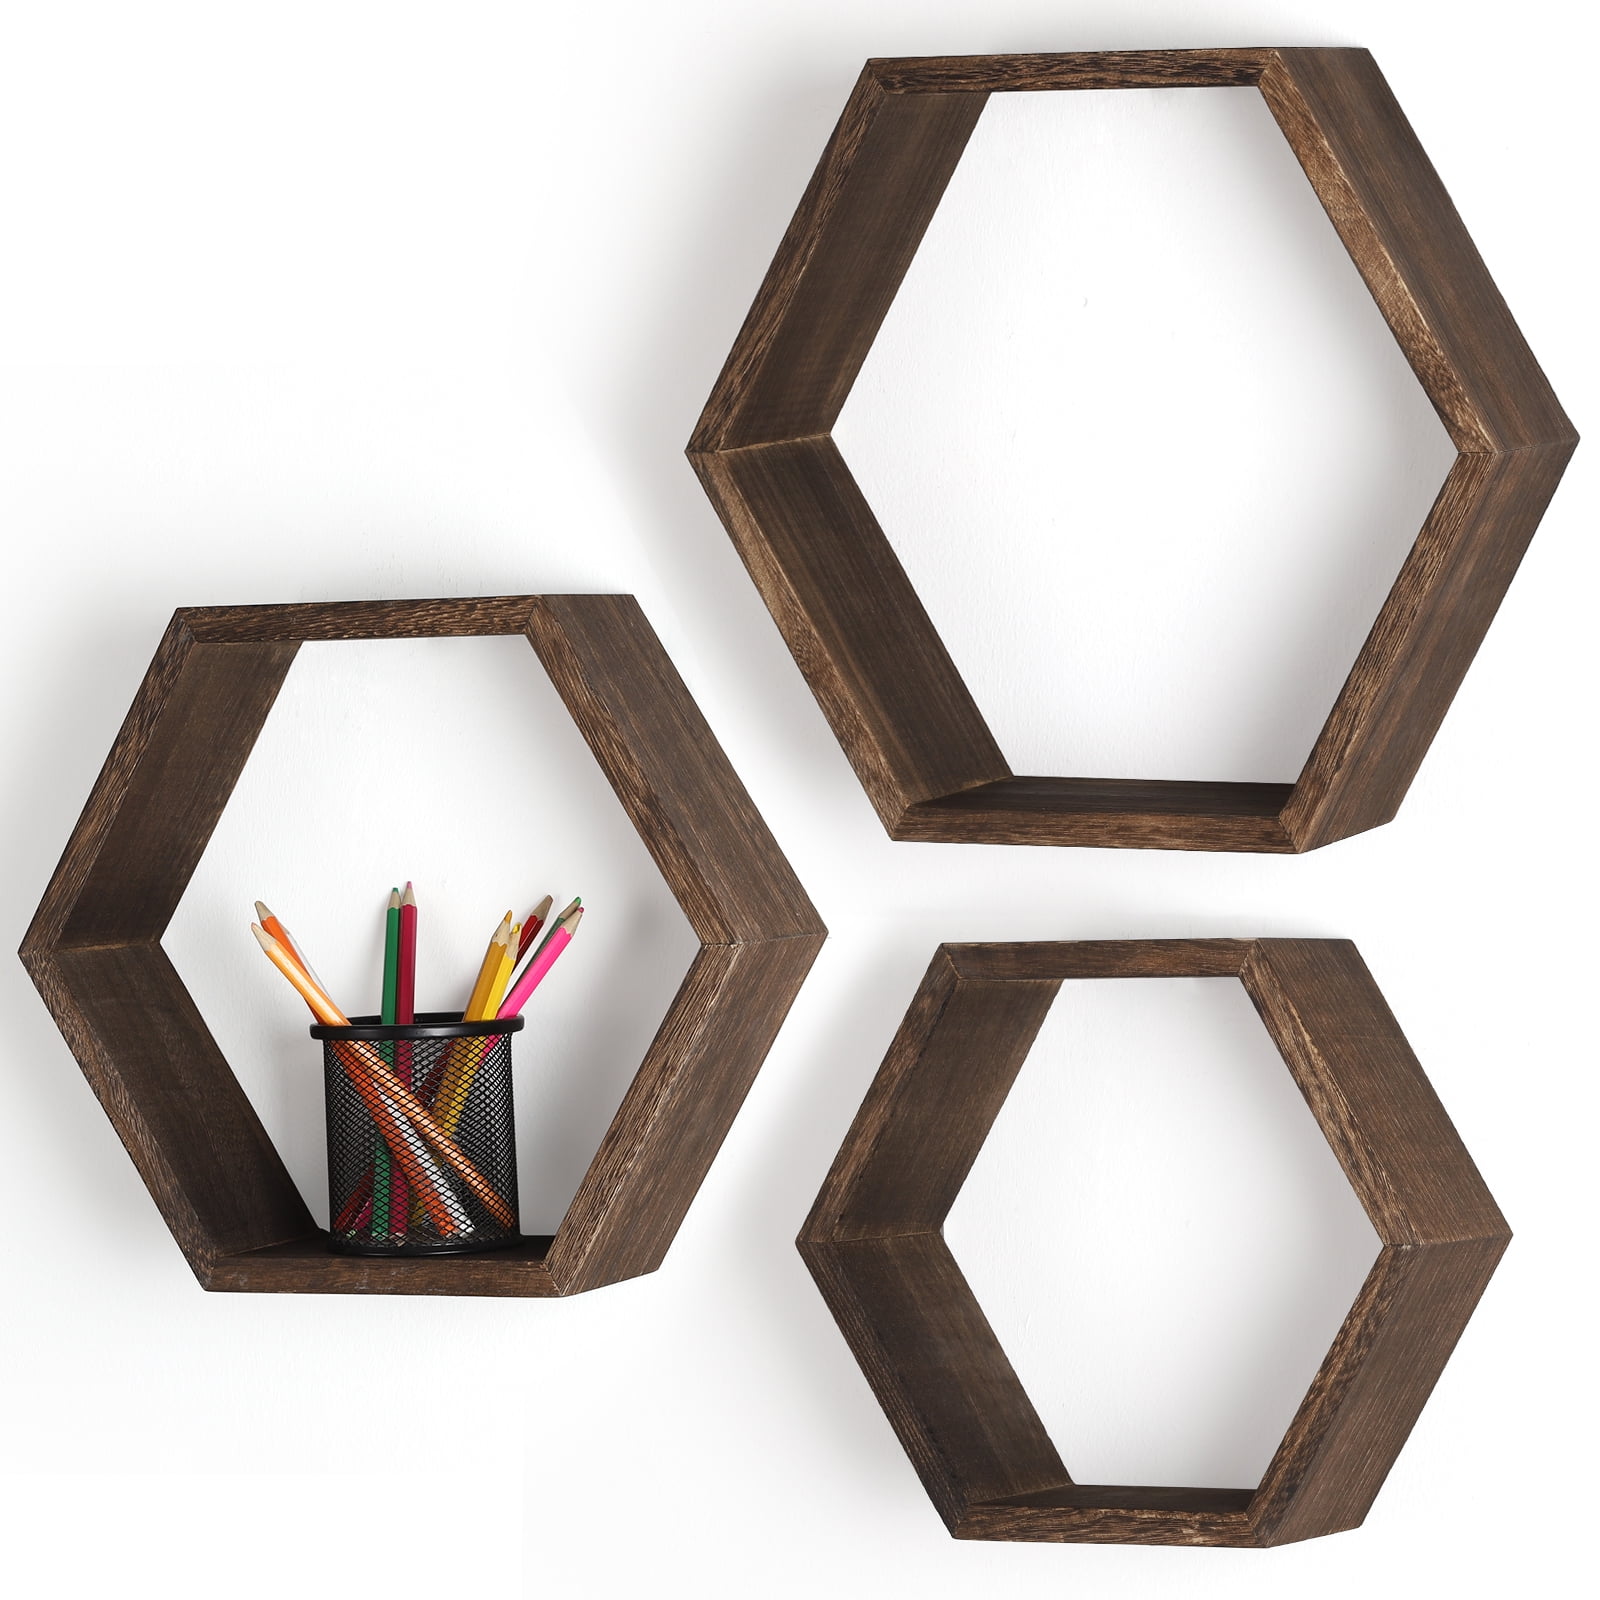 1*Wooden Box Hexagon Shaped Shelf Box Stands Honeycomb Shaped Shelves Container 